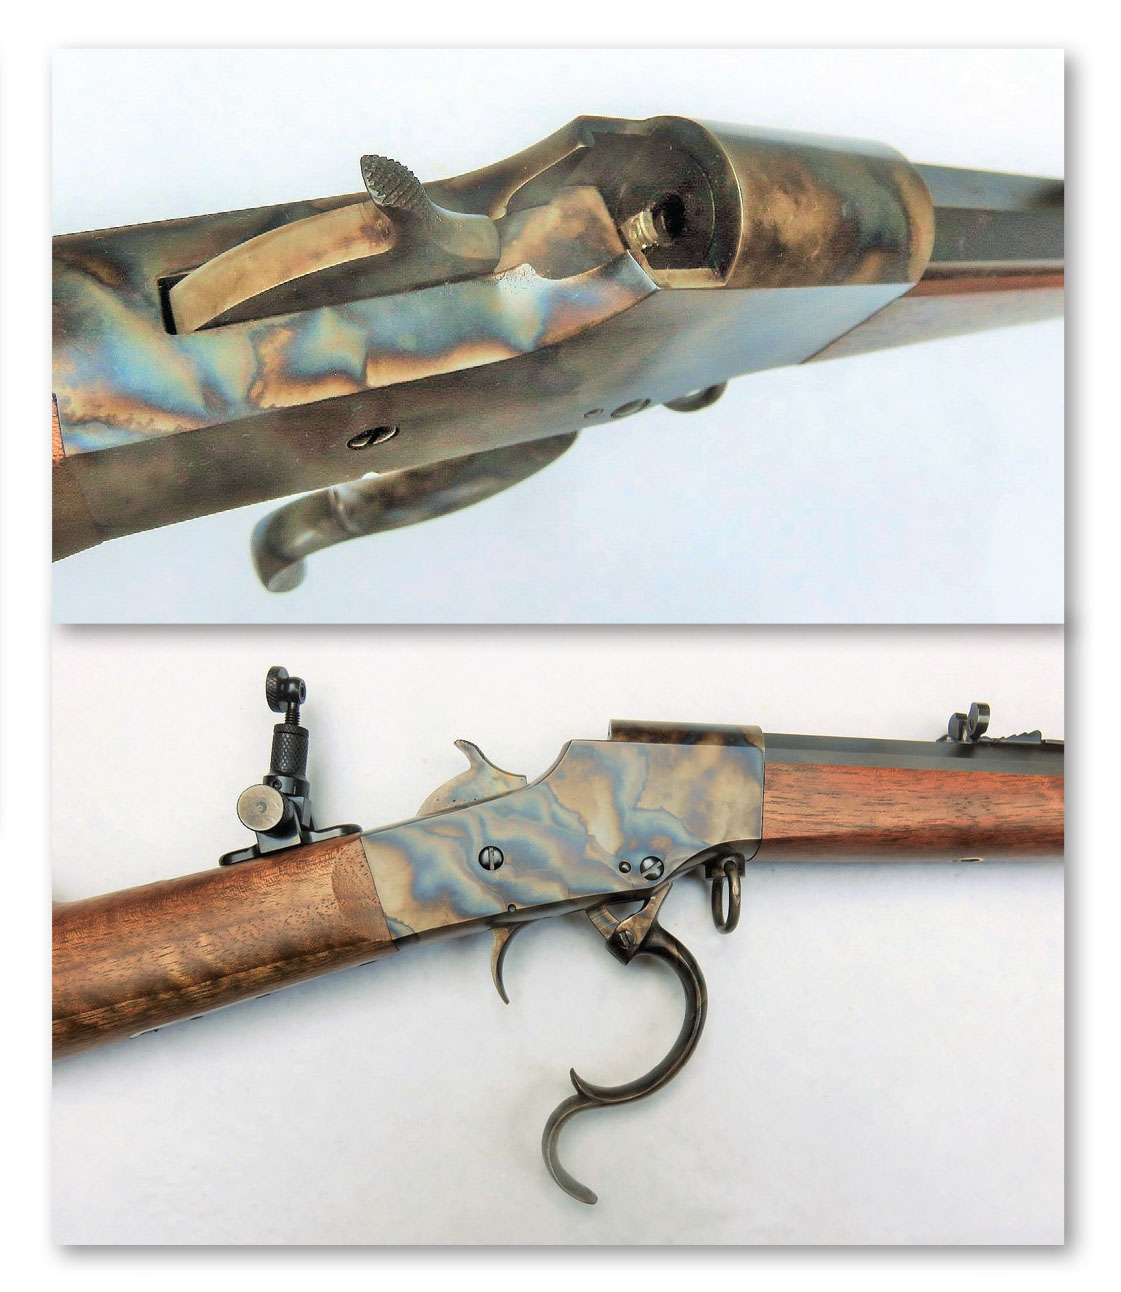 Close ups of a C. Sharps Hopkins and an Allen rifle; note cosmetic “takedown” ring at the front of the receiver.